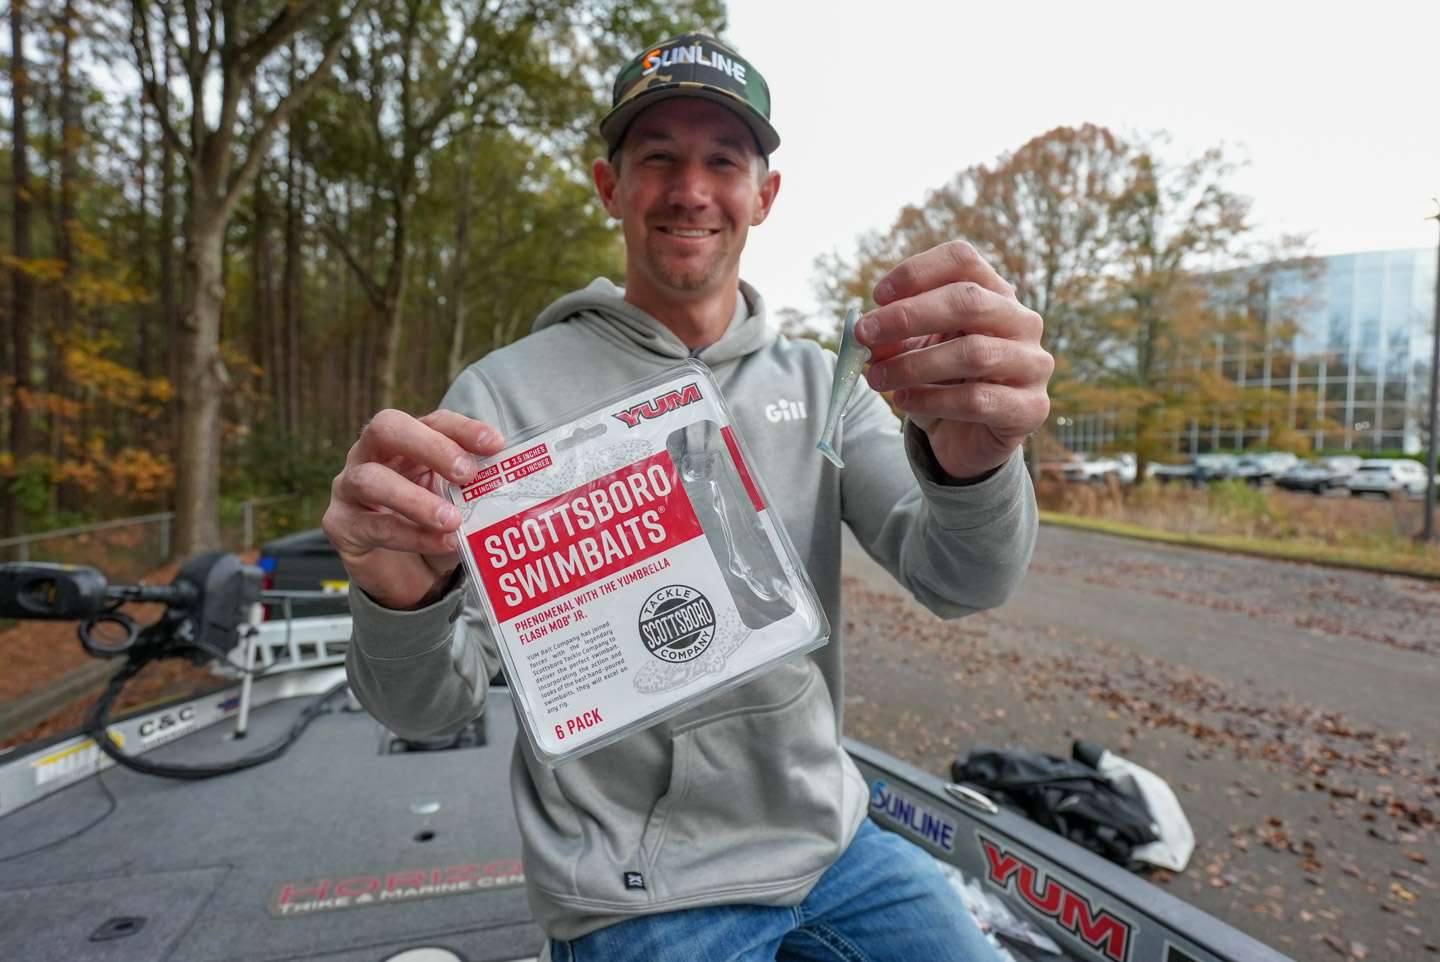 Palmer shows off a new bait that he's excited about. YUM teamed up with Scottsboro to create an injection molded copy of the Scottsboro hand-poured swimbaits. 